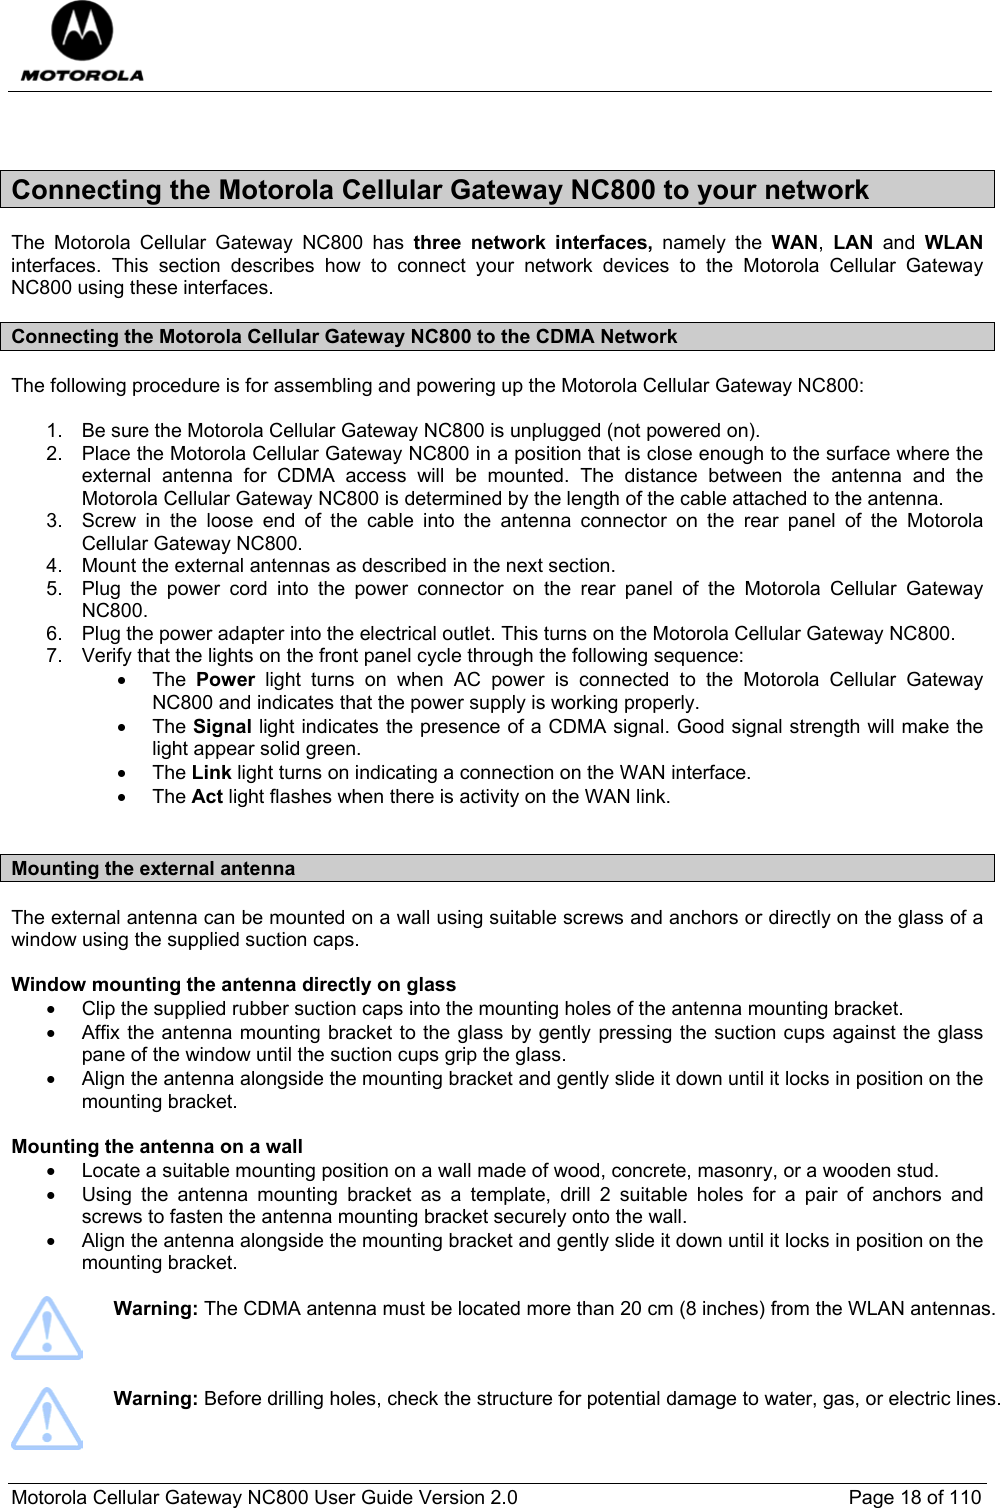  Motorola Cellular Gateway NC800 User Guide Version 2.0     Page 18 of 110   Connecting the Motorola Cellular Gateway NC800 to your network The Motorola Cellular Gateway NC800 has three network interfaces, namely the WAN,  LAN  and  WLAN interfaces. This section describes how to connect your network devices to the Motorola Cellular Gateway NC800 using these interfaces. Connecting the Motorola Cellular Gateway NC800 to the CDMA Network The following procedure is for assembling and powering up the Motorola Cellular Gateway NC800:  1.  Be sure the Motorola Cellular Gateway NC800 is unplugged (not powered on). 2.  Place the Motorola Cellular Gateway NC800 in a position that is close enough to the surface where the external antenna for CDMA access will be mounted. The distance between the antenna and the Motorola Cellular Gateway NC800 is determined by the length of the cable attached to the antenna.  3.  Screw in the loose end of the cable into the antenna connector on the rear panel of the Motorola Cellular Gateway NC800. 4.  Mount the external antennas as described in the next section. 5.  Plug the power cord into the power connector on the rear panel of the Motorola Cellular Gateway NC800. 6.  Plug the power adapter into the electrical outlet. This turns on the Motorola Cellular Gateway NC800. 7.  Verify that the lights on the front panel cycle through the following sequence: • The Power light turns on when AC power is connected to the Motorola Cellular Gateway NC800 and indicates that the power supply is working properly. • The Signal light indicates the presence of a CDMA signal. Good signal strength will make the light appear solid green. • The Link light turns on indicating a connection on the WAN interface. • The Act light flashes when there is activity on the WAN link.  Mounting the external antenna  The external antenna can be mounted on a wall using suitable screws and anchors or directly on the glass of a window using the supplied suction caps.  Window mounting the antenna directly on glass •  Clip the supplied rubber suction caps into the mounting holes of the antenna mounting bracket. •  Affix the antenna mounting bracket to the glass by gently pressing the suction cups against the glass pane of the window until the suction cups grip the glass. •  Align the antenna alongside the mounting bracket and gently slide it down until it locks in position on the mounting bracket.  Mounting the antenna on a wall  •  Locate a suitable mounting position on a wall made of wood, concrete, masonry, or a wooden stud. •  Using the antenna mounting bracket as a template, drill 2 suitable holes for a pair of anchors and screws to fasten the antenna mounting bracket securely onto the wall. •  Align the antenna alongside the mounting bracket and gently slide it down until it locks in position on the mounting bracket.    Warning: The CDMA antenna must be located more than 20 cm (8 inches) from the WLAN antennas.     Warning: Before drilling holes, check the structure for potential damage to water, gas, or electric lines.  